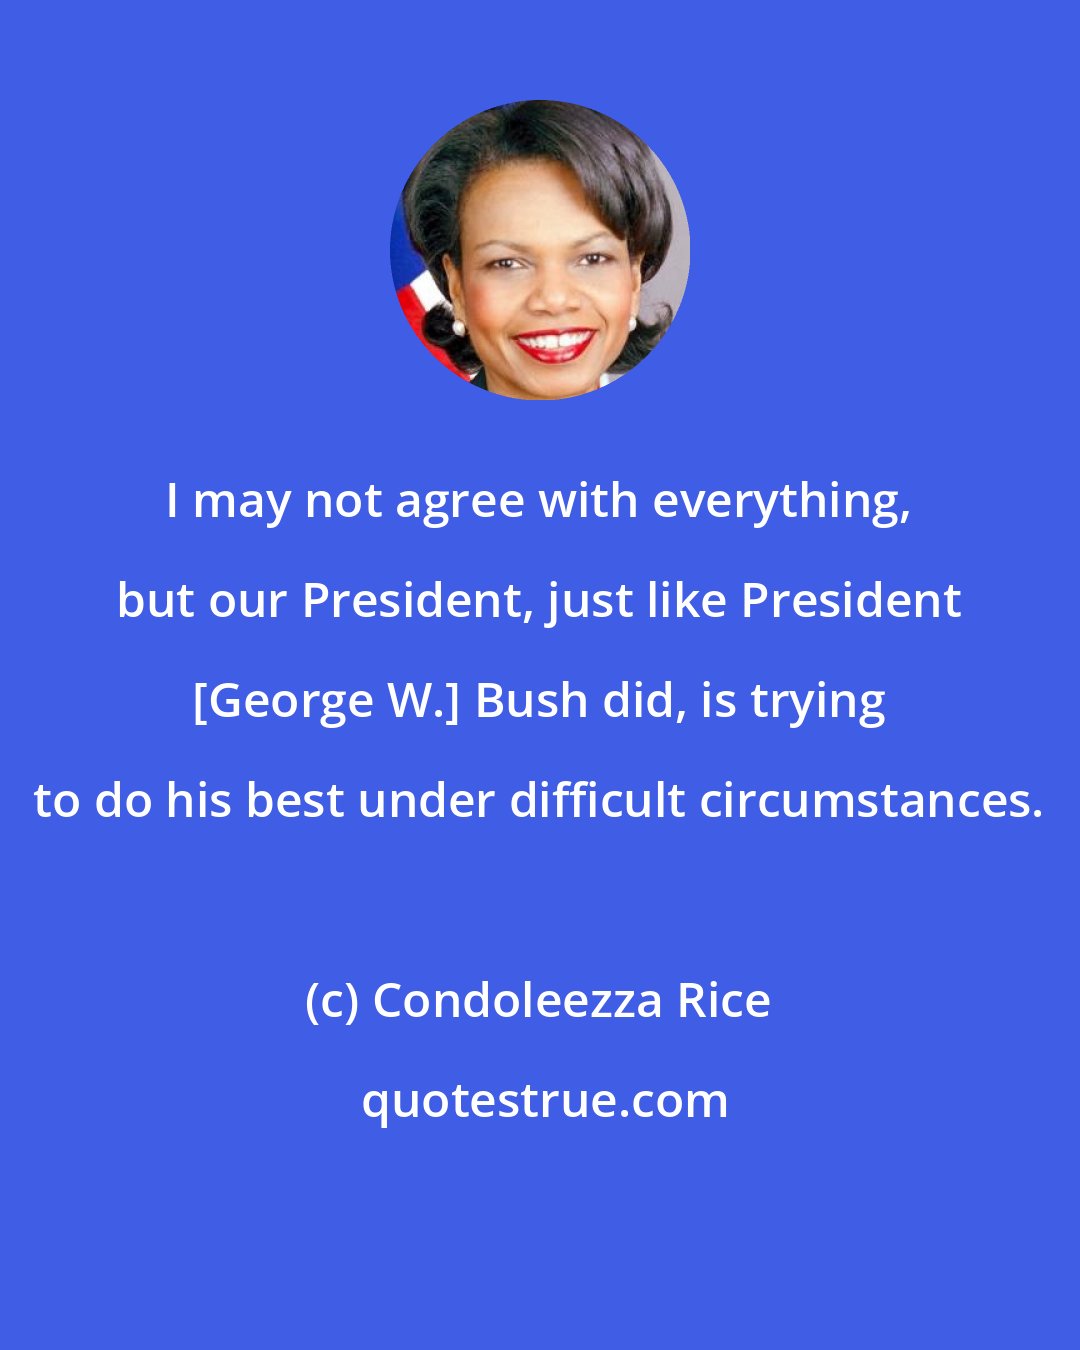 Condoleezza Rice: I may not agree with everything, but our President, just like President [George W.] Bush did, is trying to do his best under difficult circumstances.